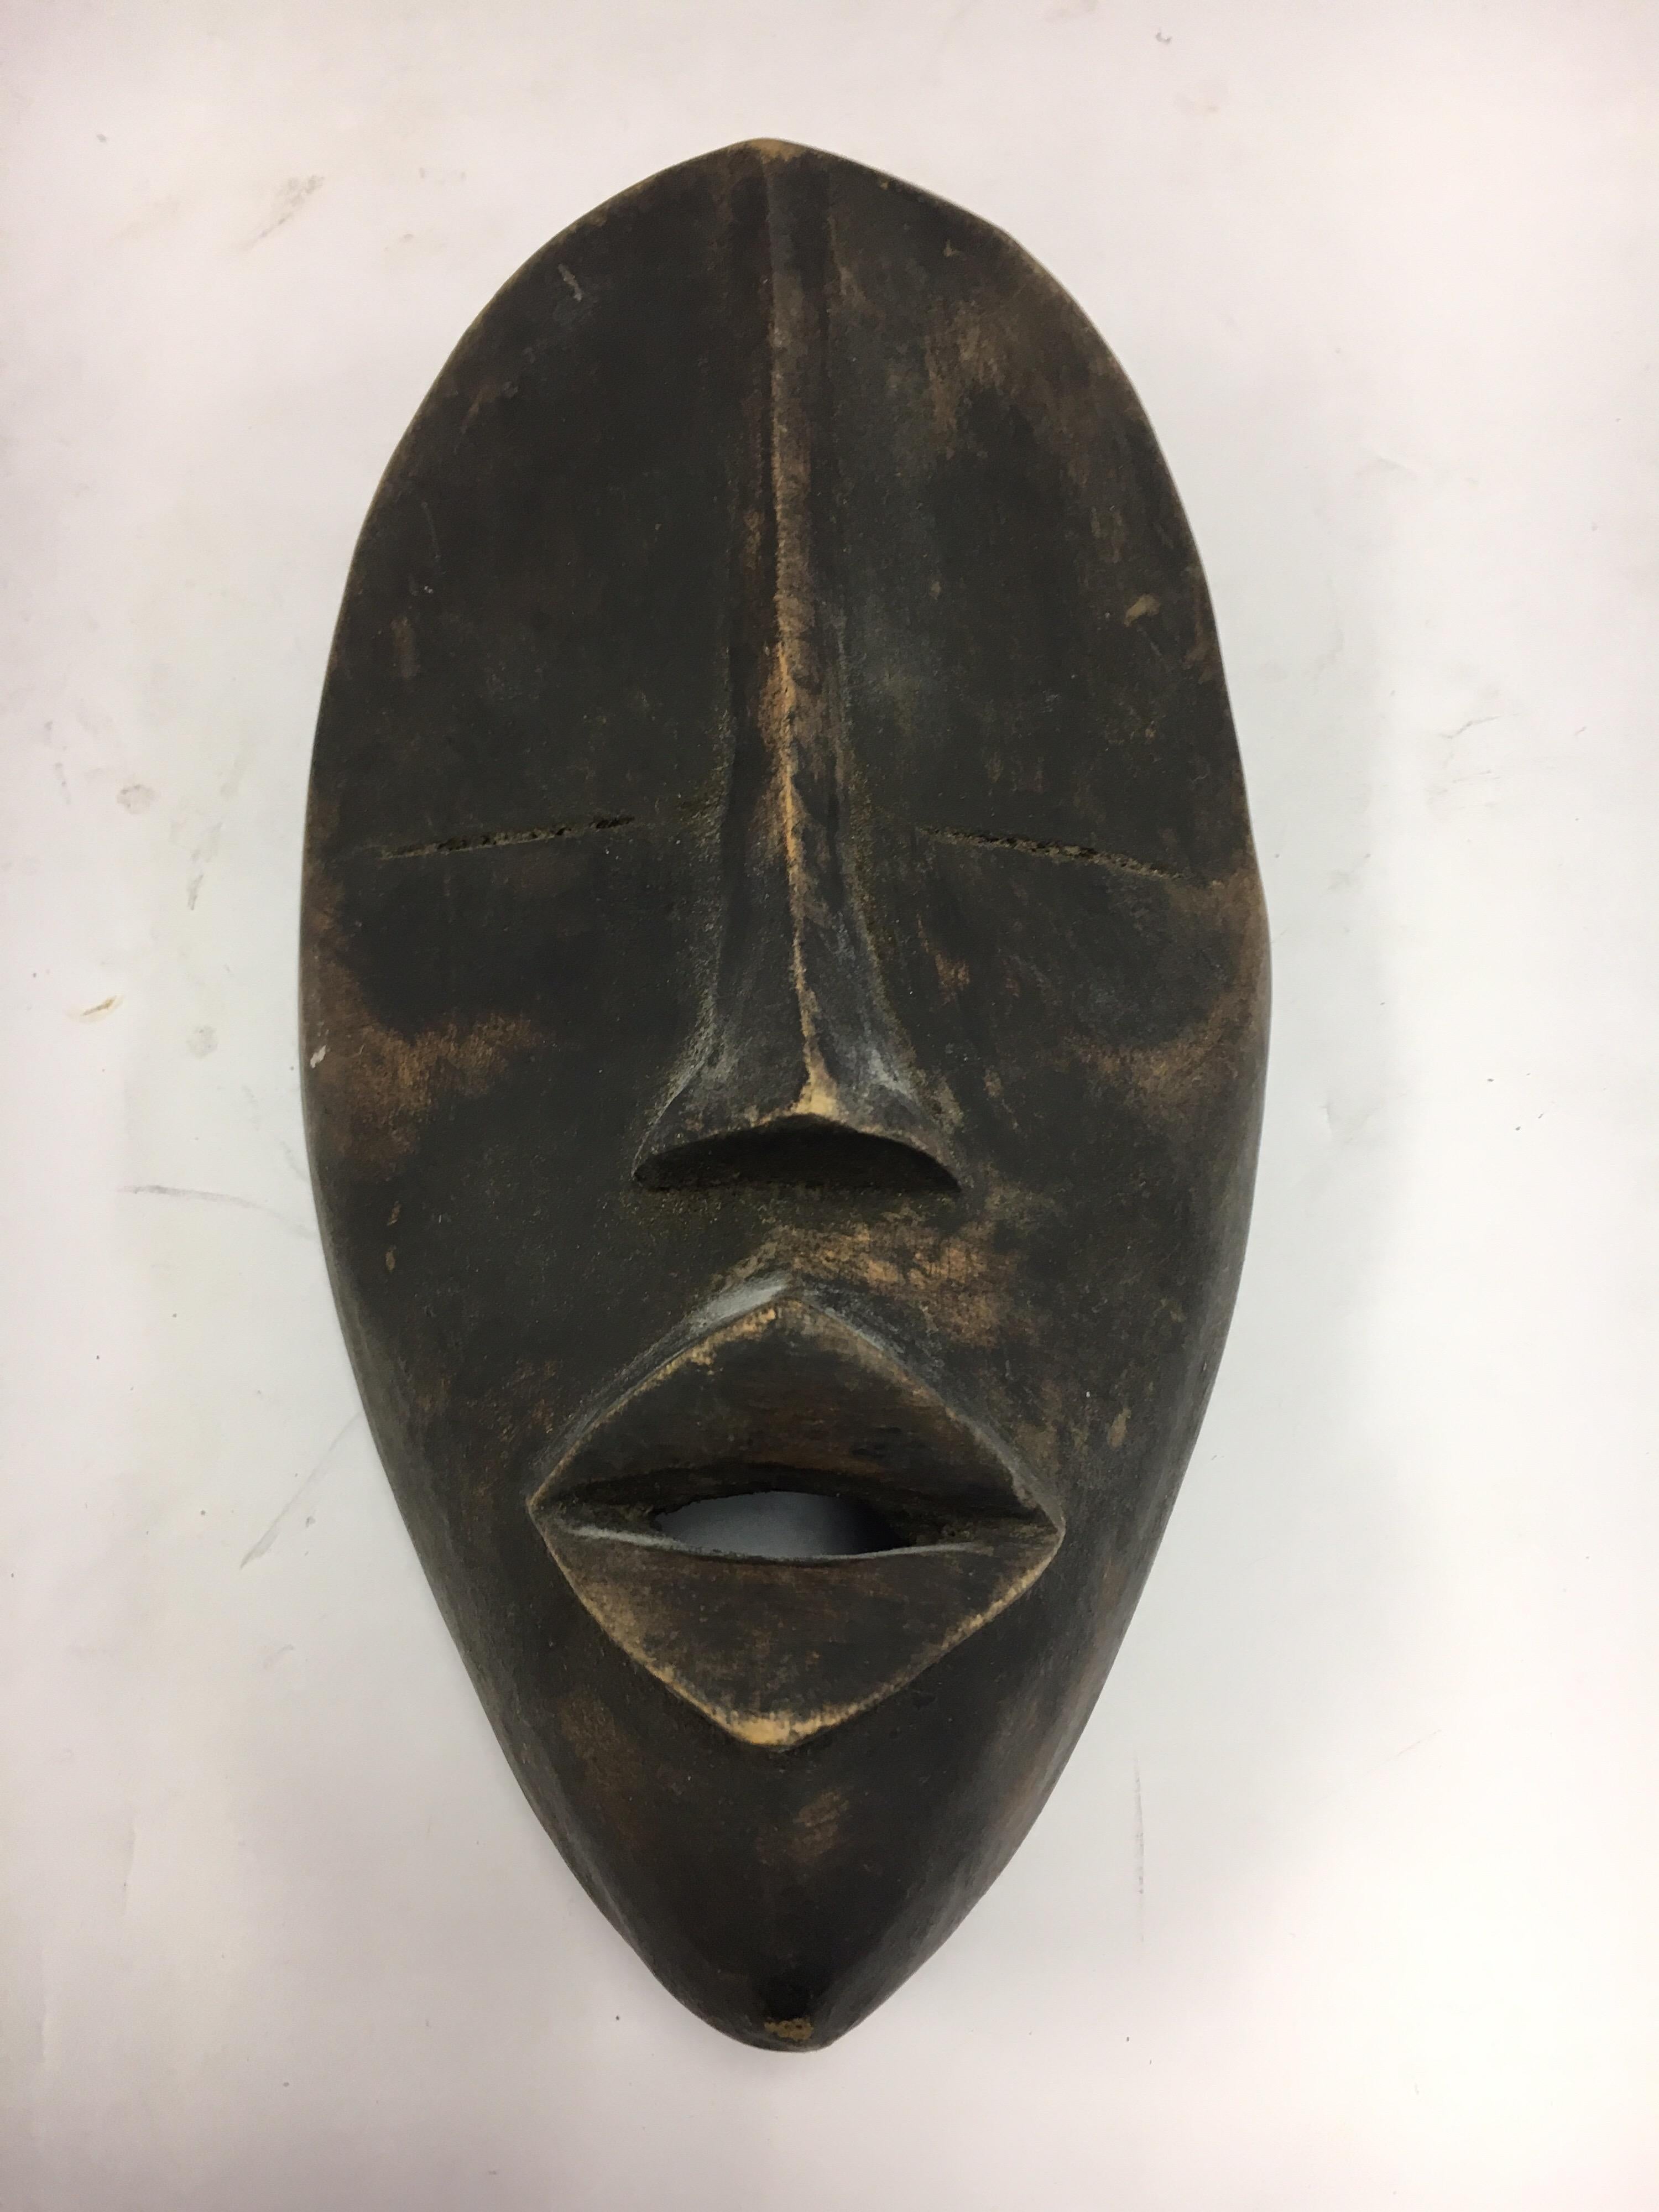 Coveted decorative African hand-carved wood mask with graphic elements, circa 1960s
This is a decorative item from the 1960s, it was made for export, it is not an antique tribal mask.
It was made by a master carver from a single piece of wood and